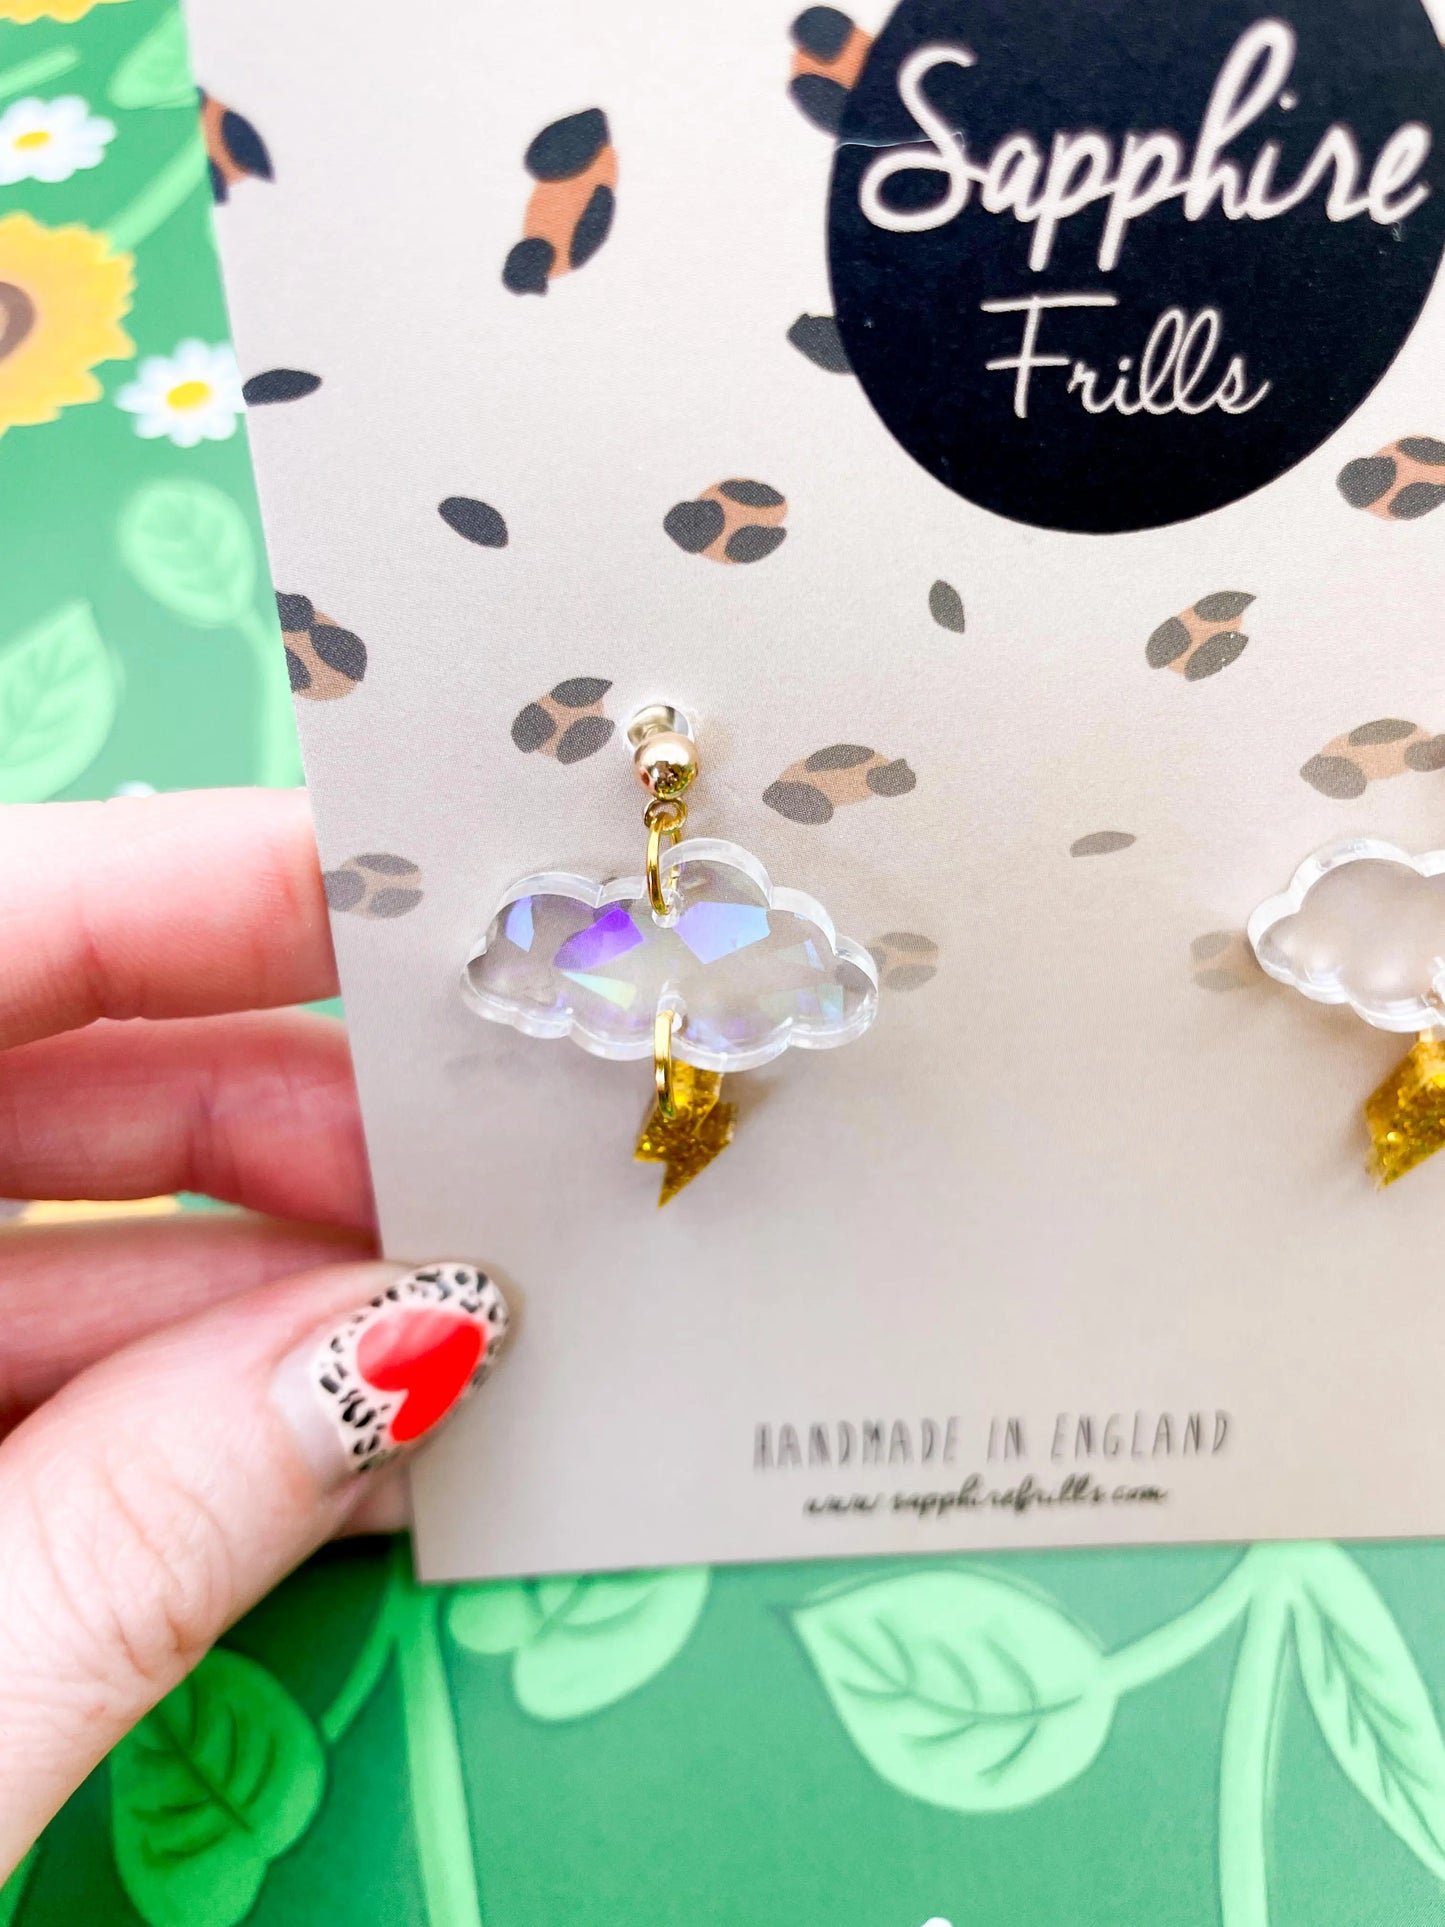 Iridescent Rainbow and Gold Glitter April Storms Small Cloud & Bolt Dangle Earrings from Sapphire Frills